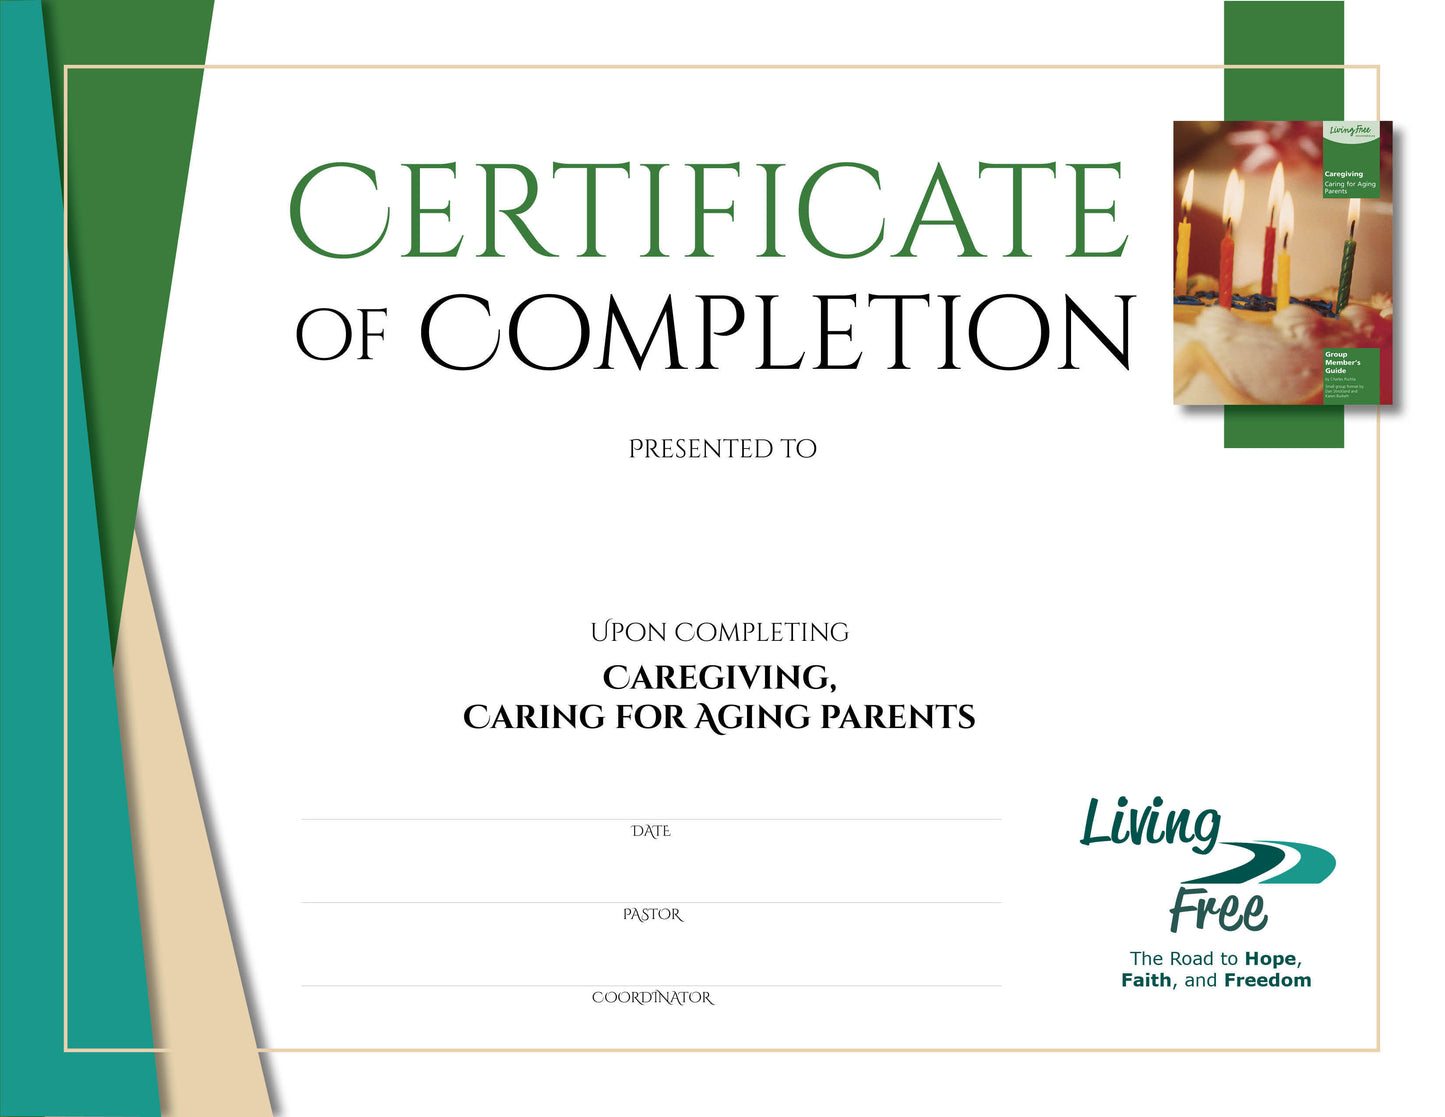 Caregiving: Caring for Aging Parents Certificate of Completion